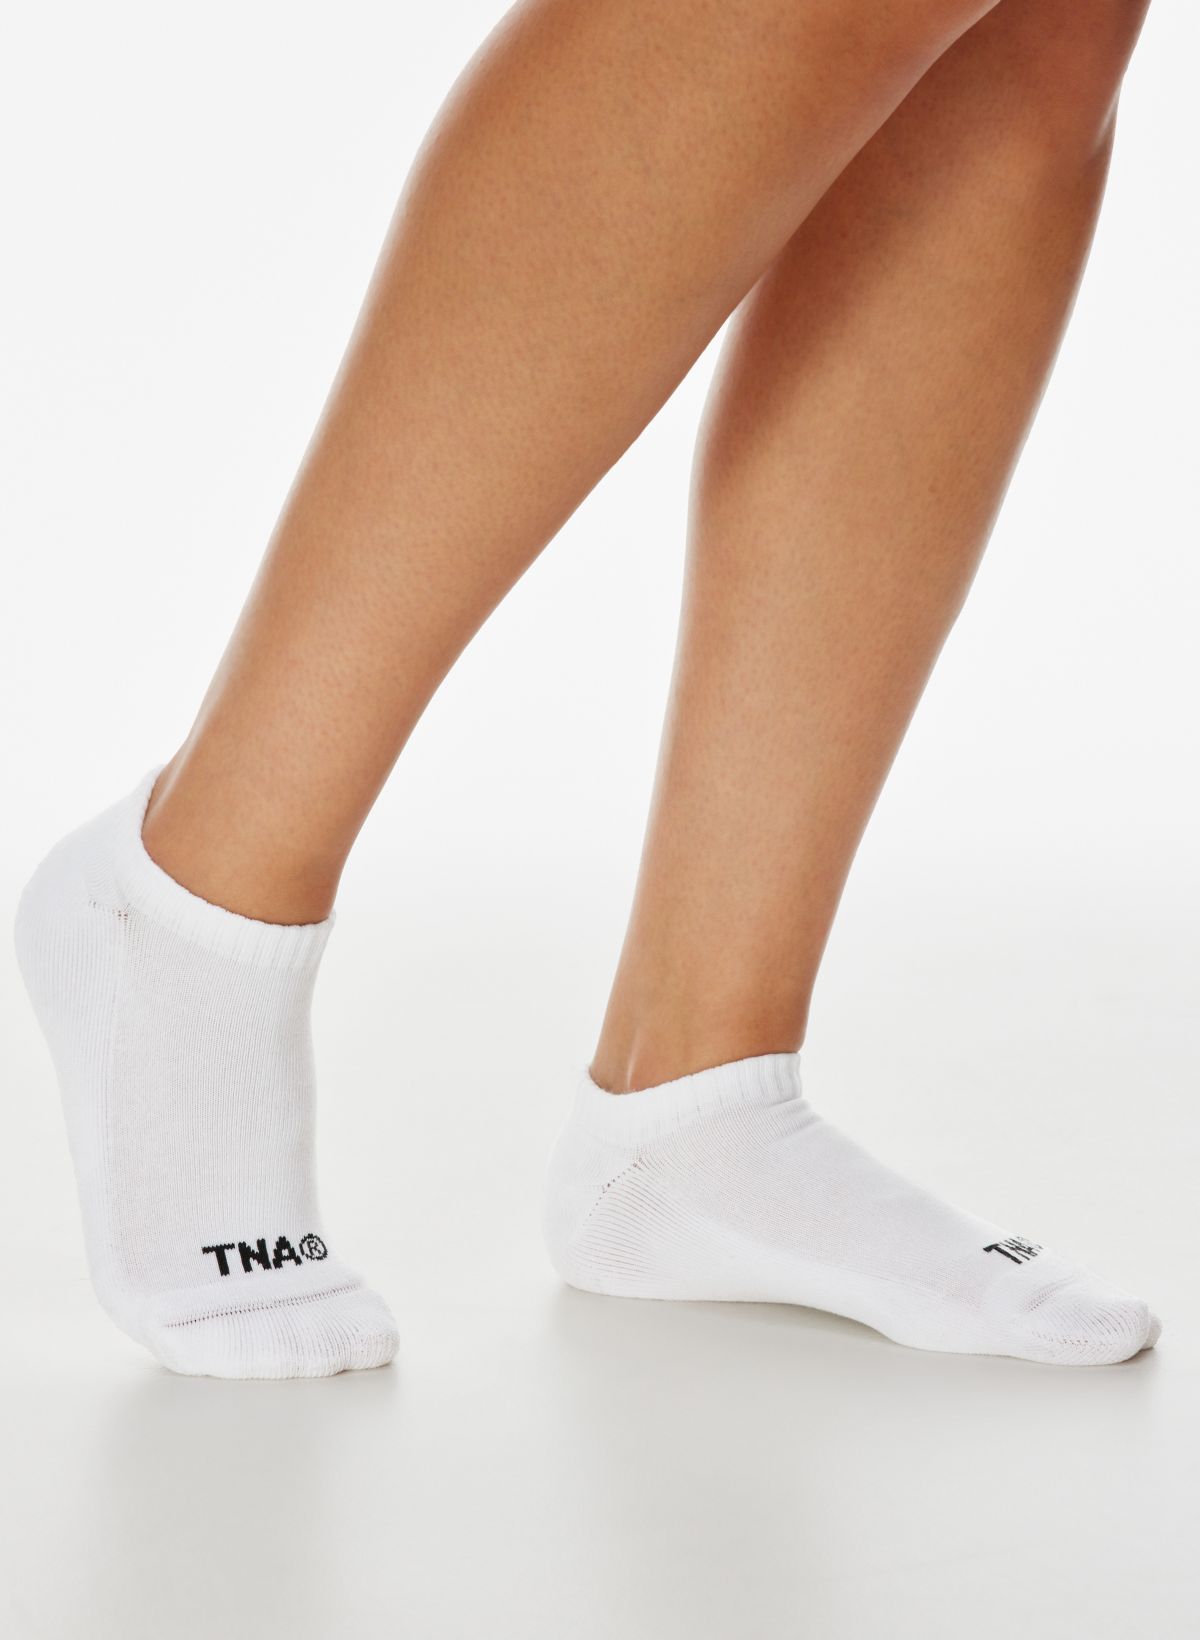 Tna Base Grip No-Show Socks 3-Pack in White/Black Size XS/Small | Cotton/Nylon/Polyester